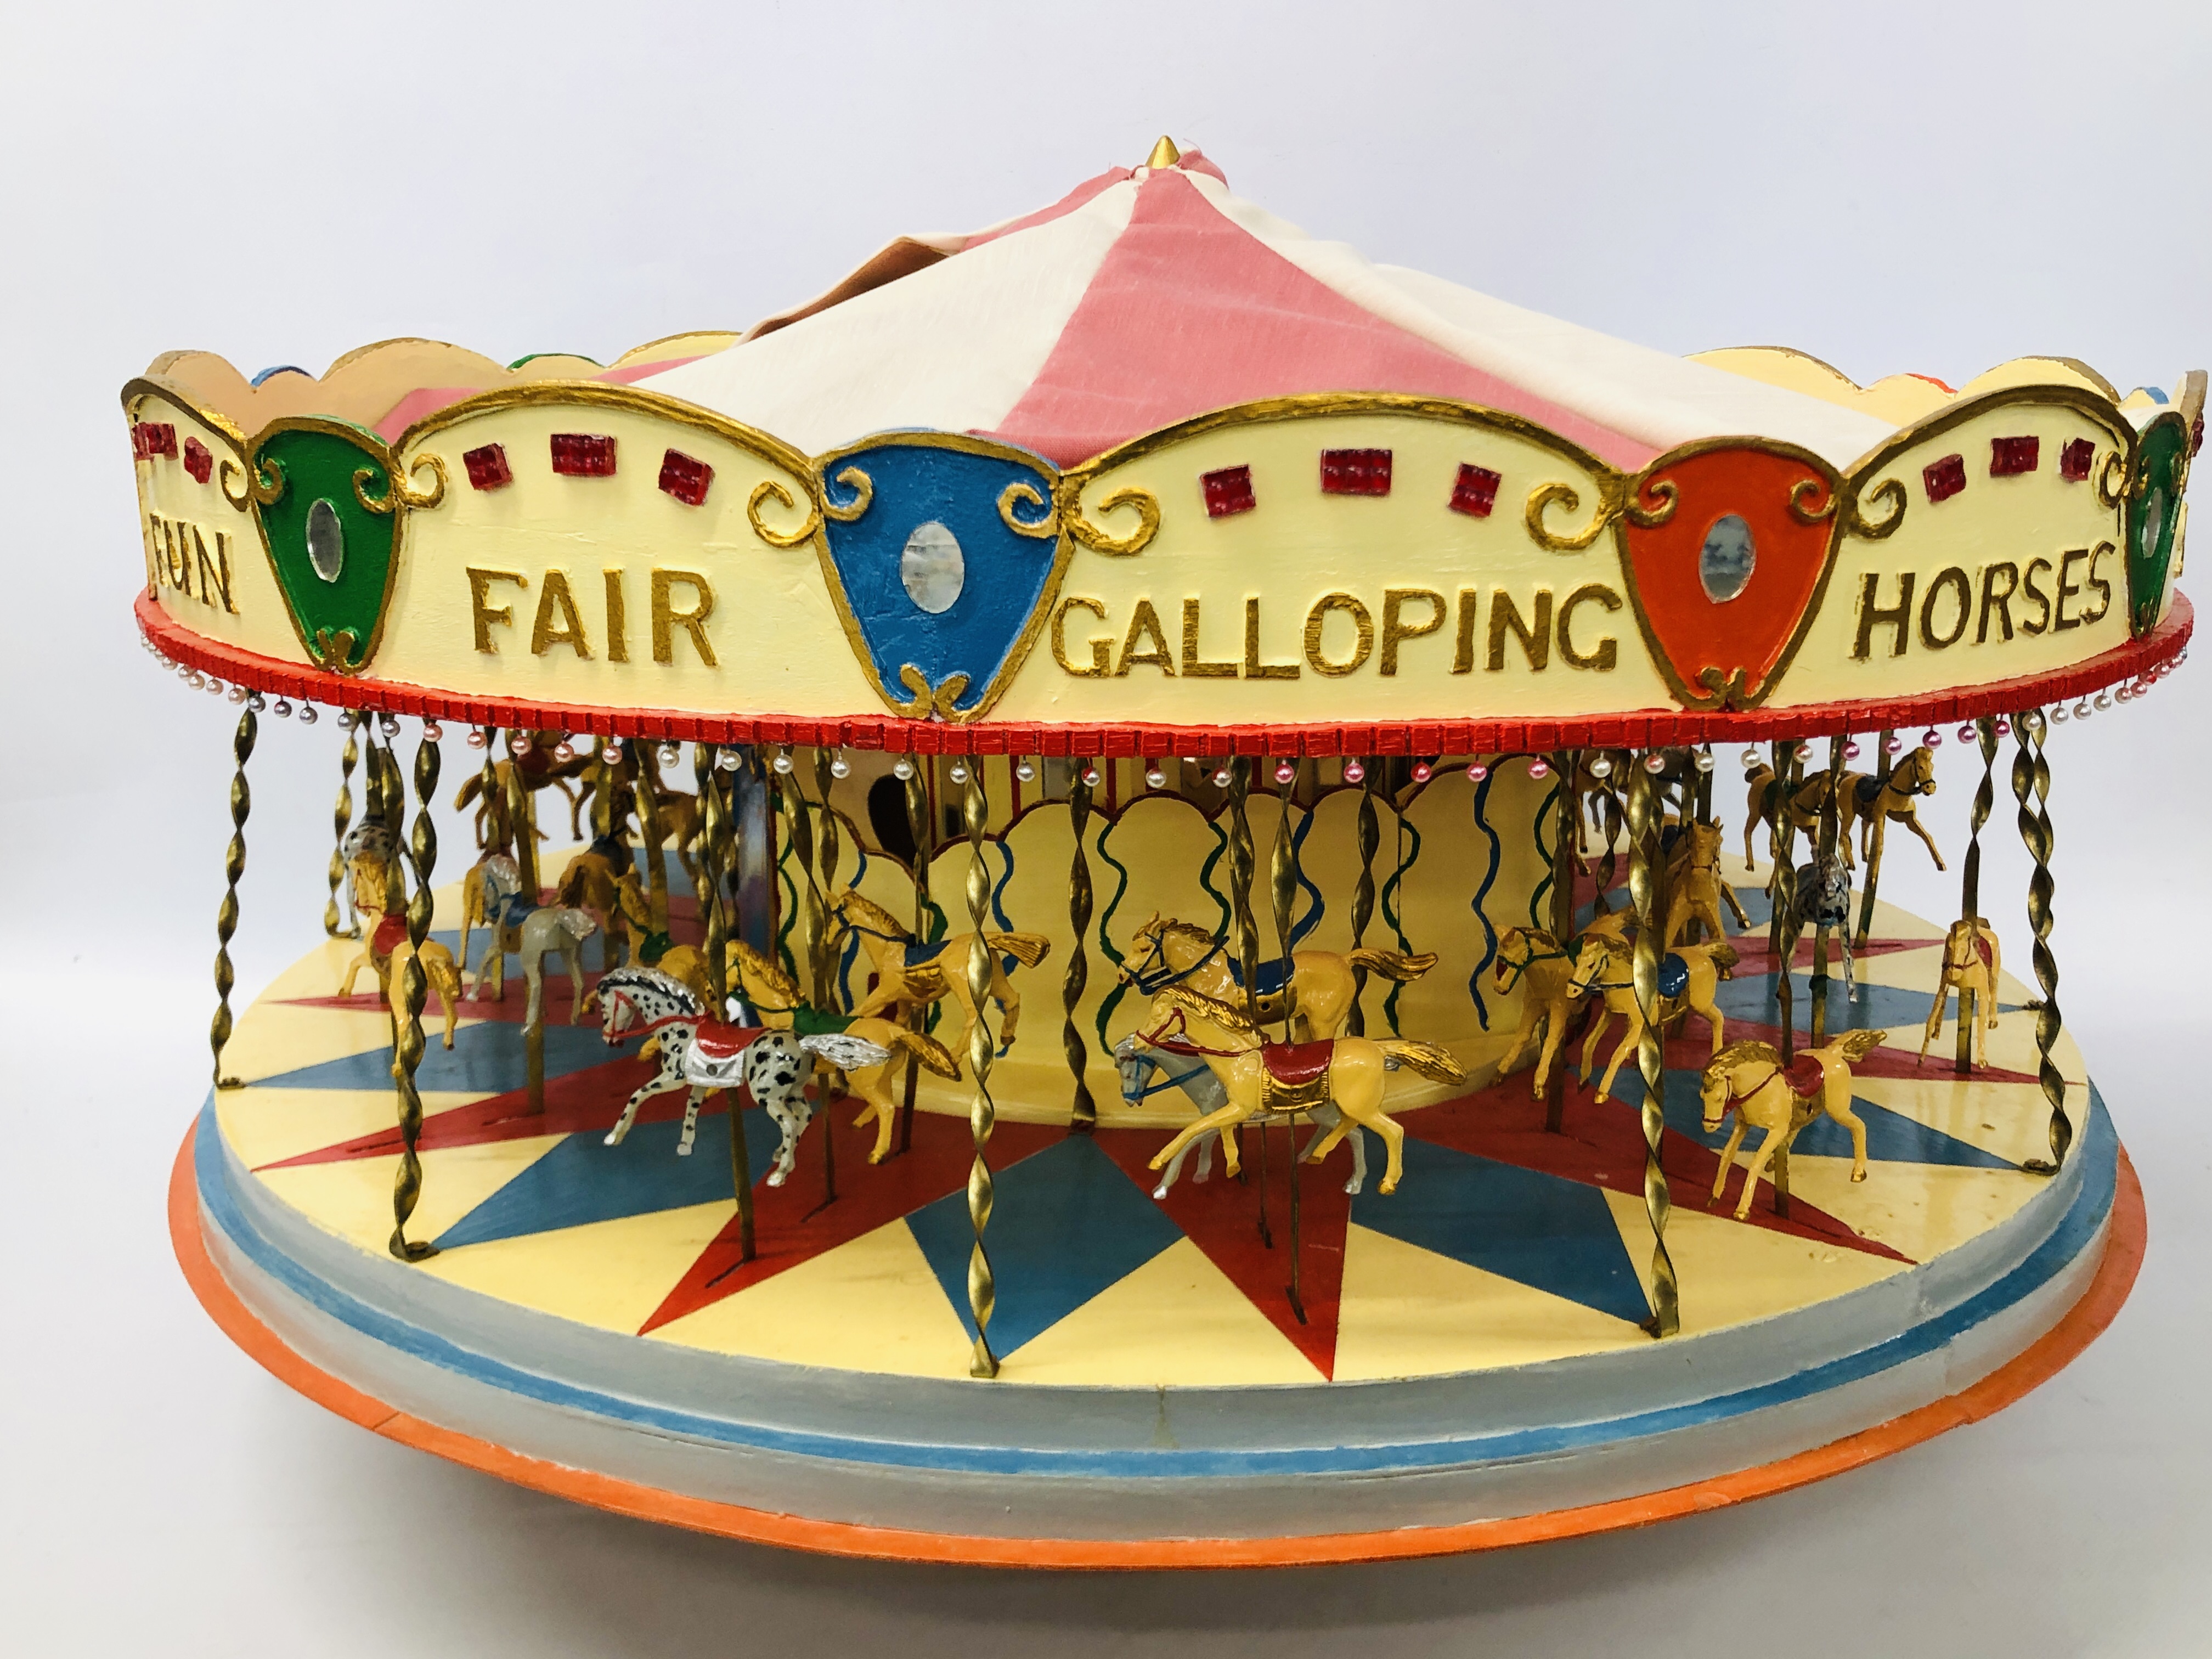 A VINTAGE HANDCRAFTED WOODEN MODEL OF A FAIRGROUND CAROUSEL WITH MOTORISED ACTION AND LIGHTS - - Image 7 of 10